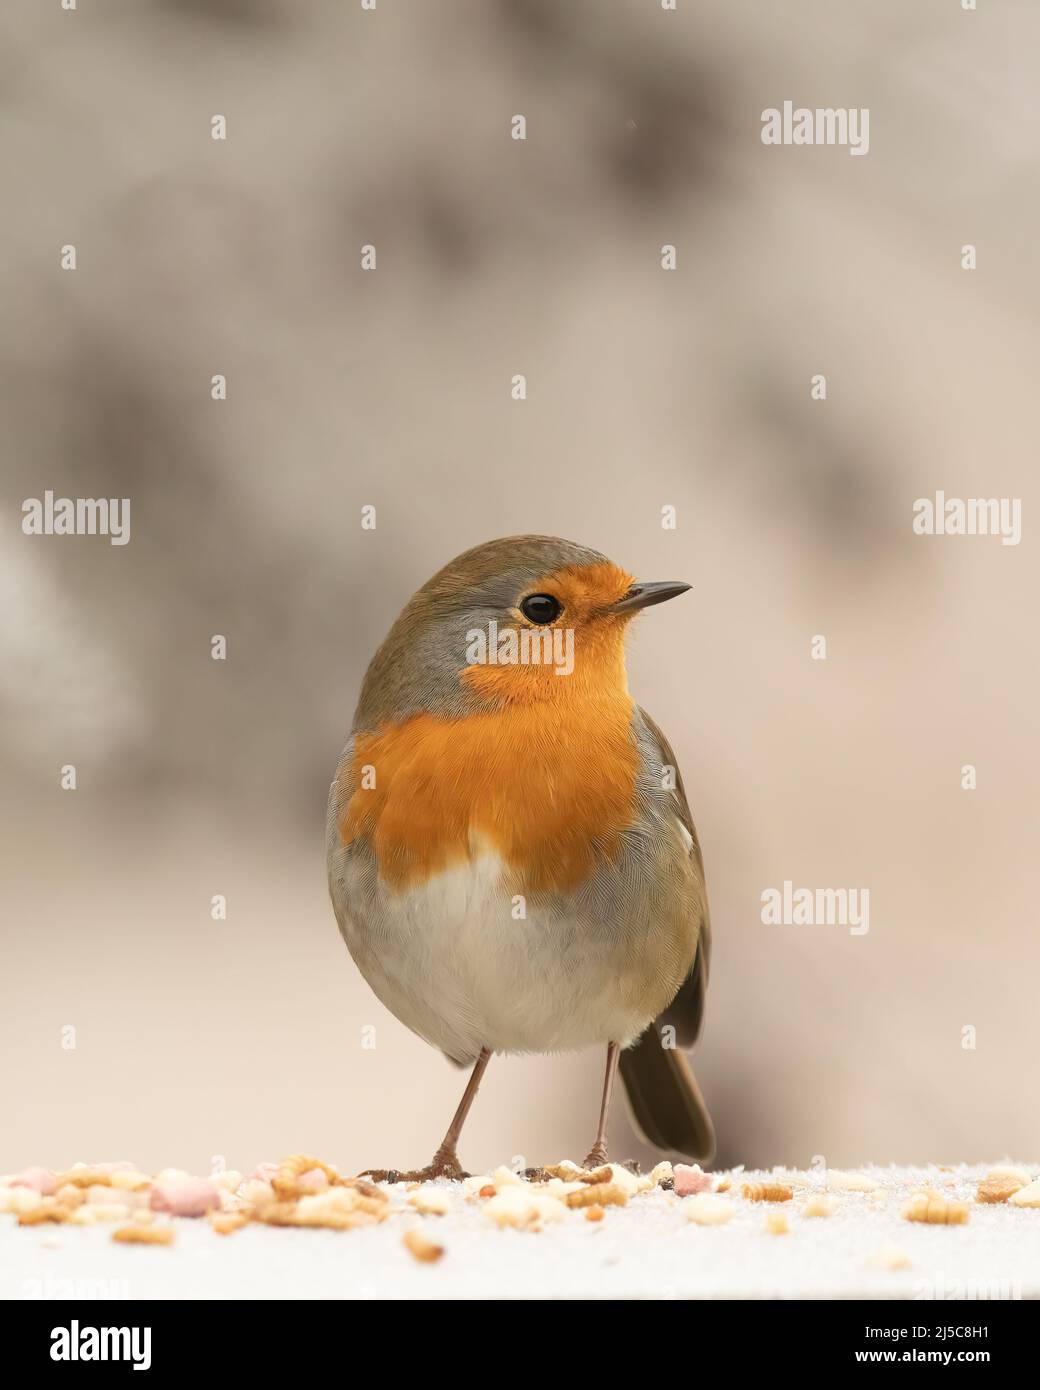 Robin redbreast, Erithacus rubecula, perched on icy ledge with sprinkle of bird seed with blurred background Stock Photo